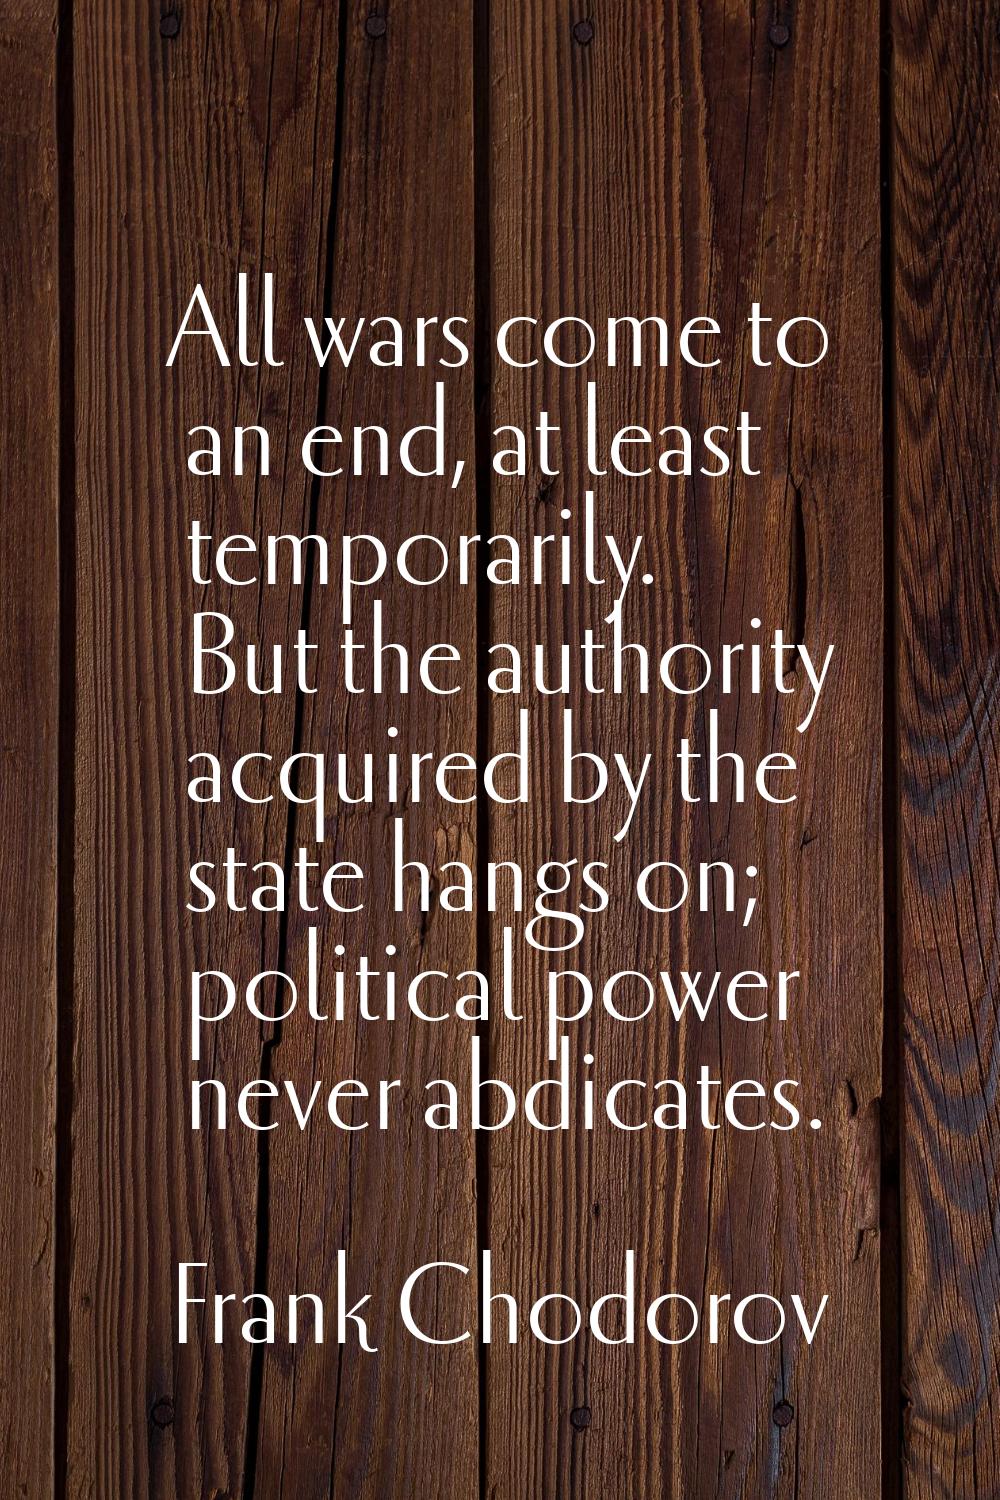 All wars come to an end, at least temporarily. But the authority acquired by the state hangs on; po